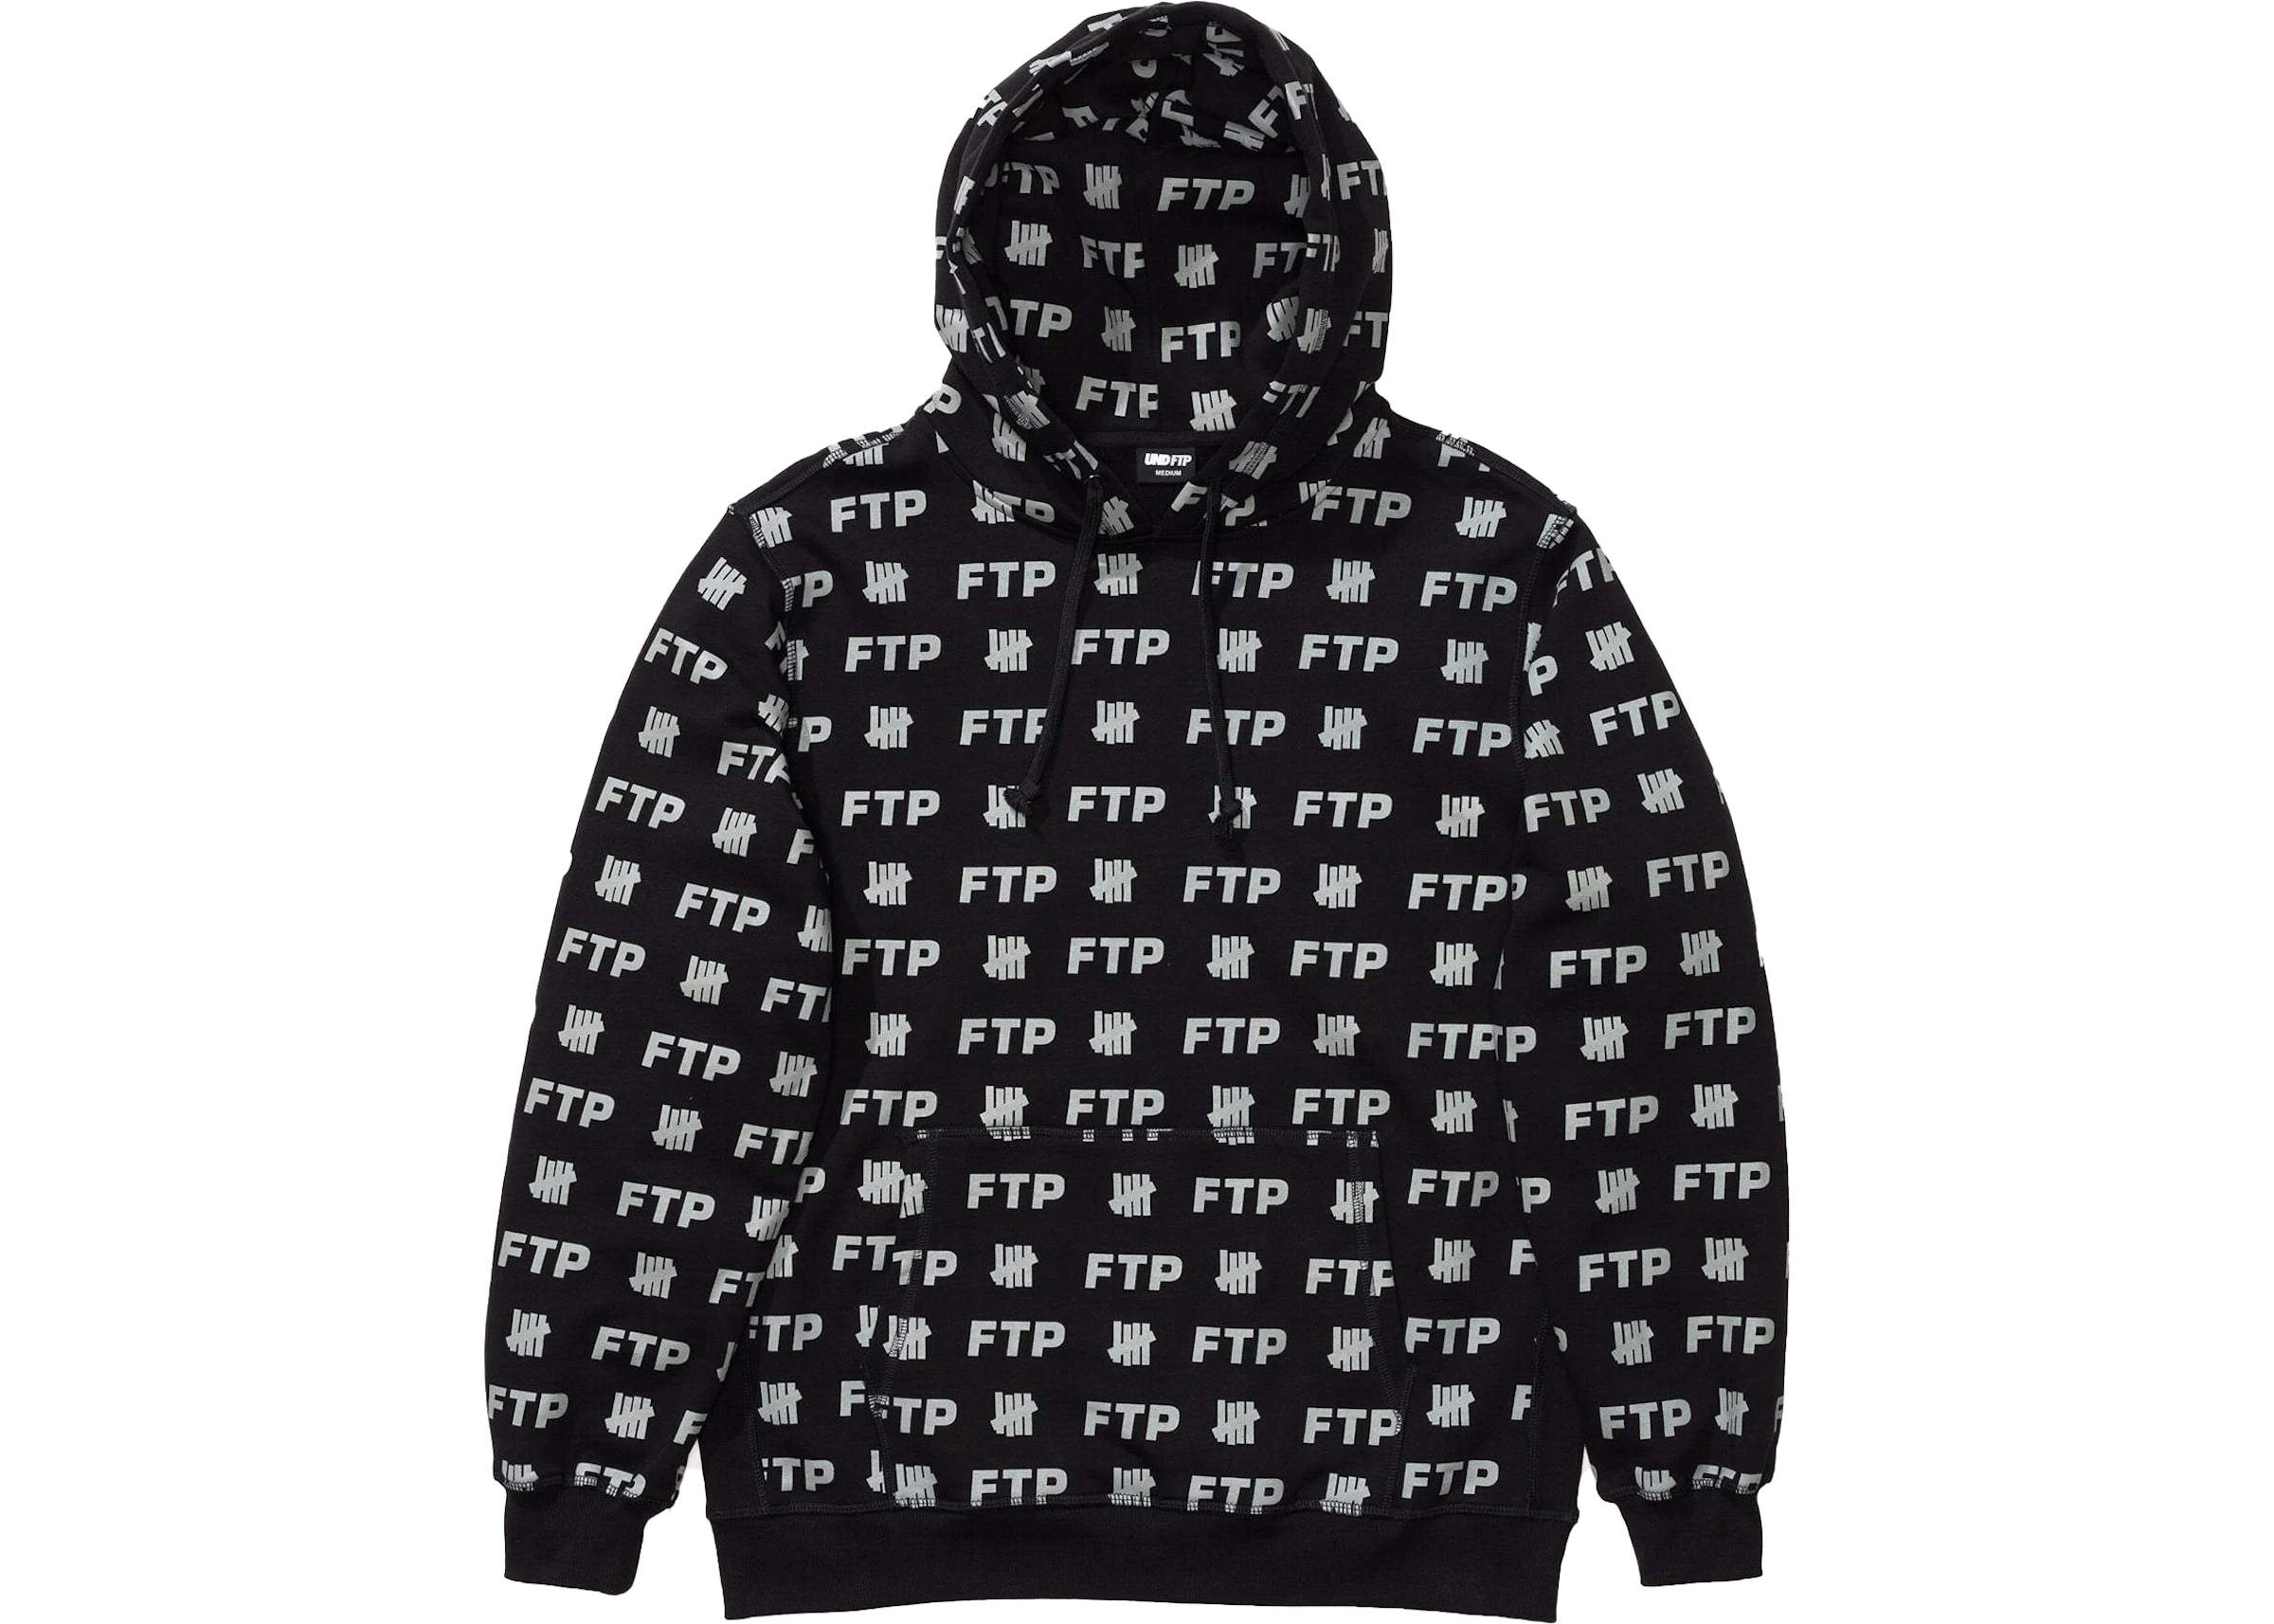 FTP all over hoodie XL-